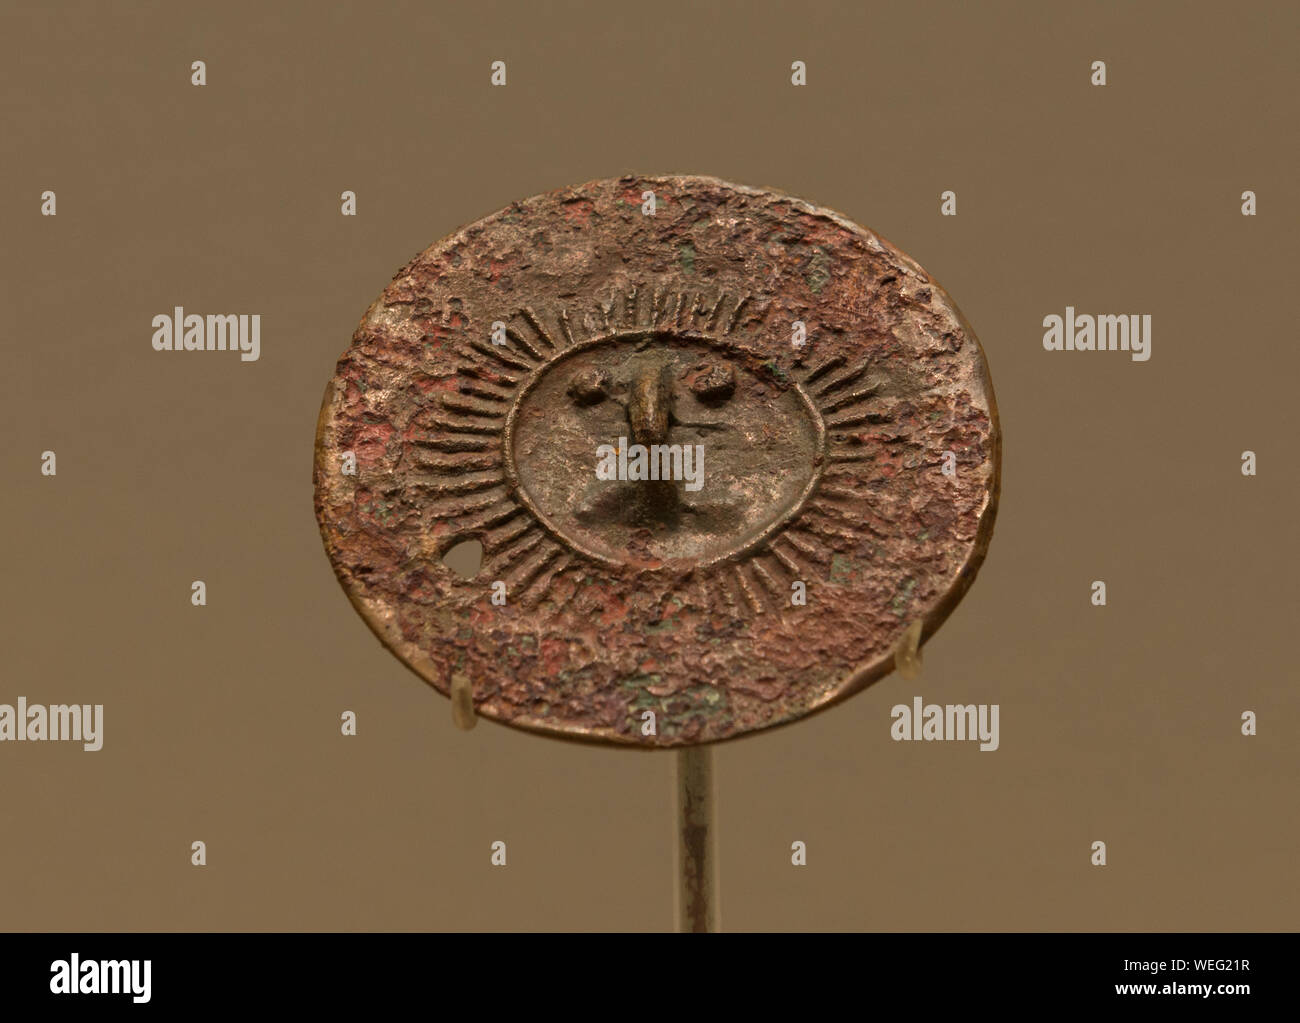 The human face and sun pattern bronze mirror. 3800 - 3600 years ago. The Xinjiang Uygur Autonomous Region Museum. Stock Photo